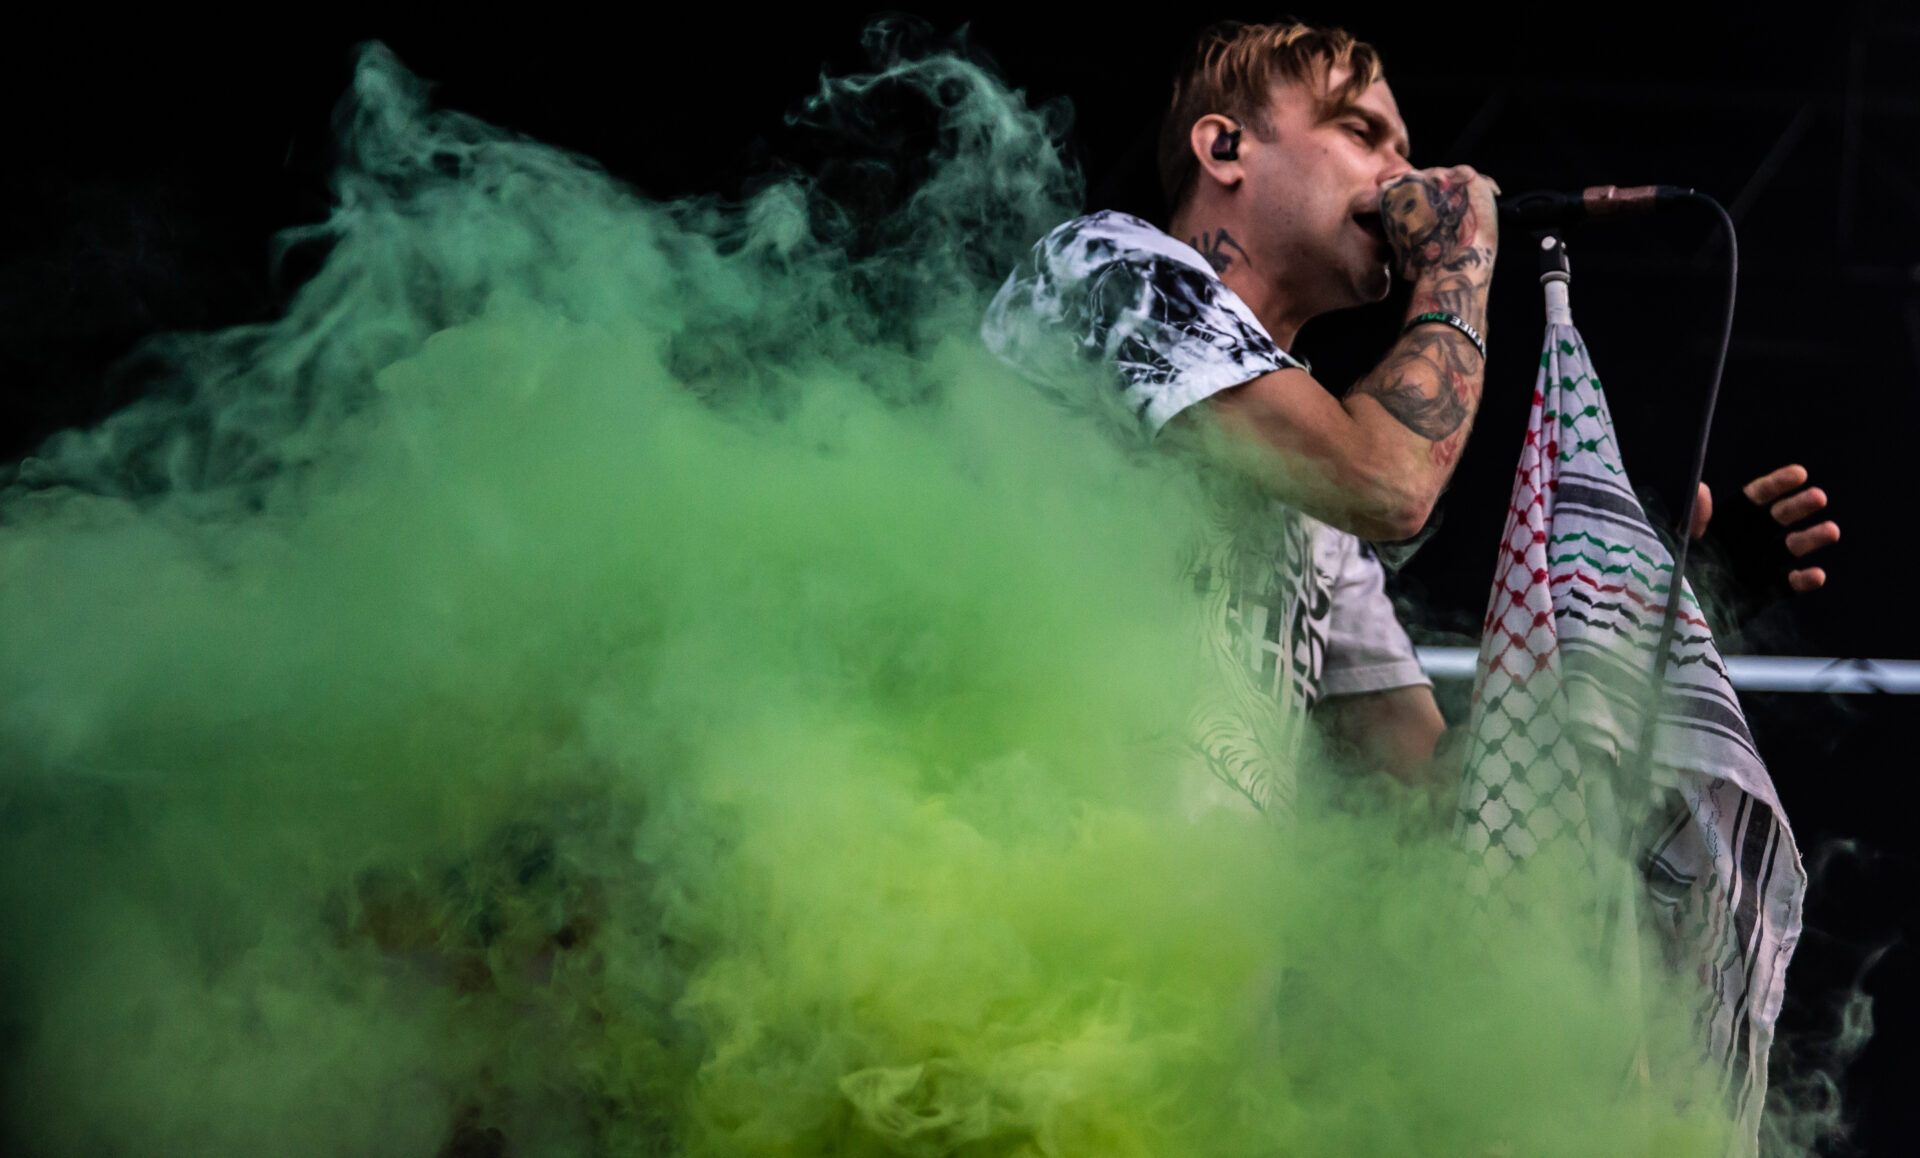 PHOTOS: The Vans Warped Tour’s final stop in Mountain View, CA